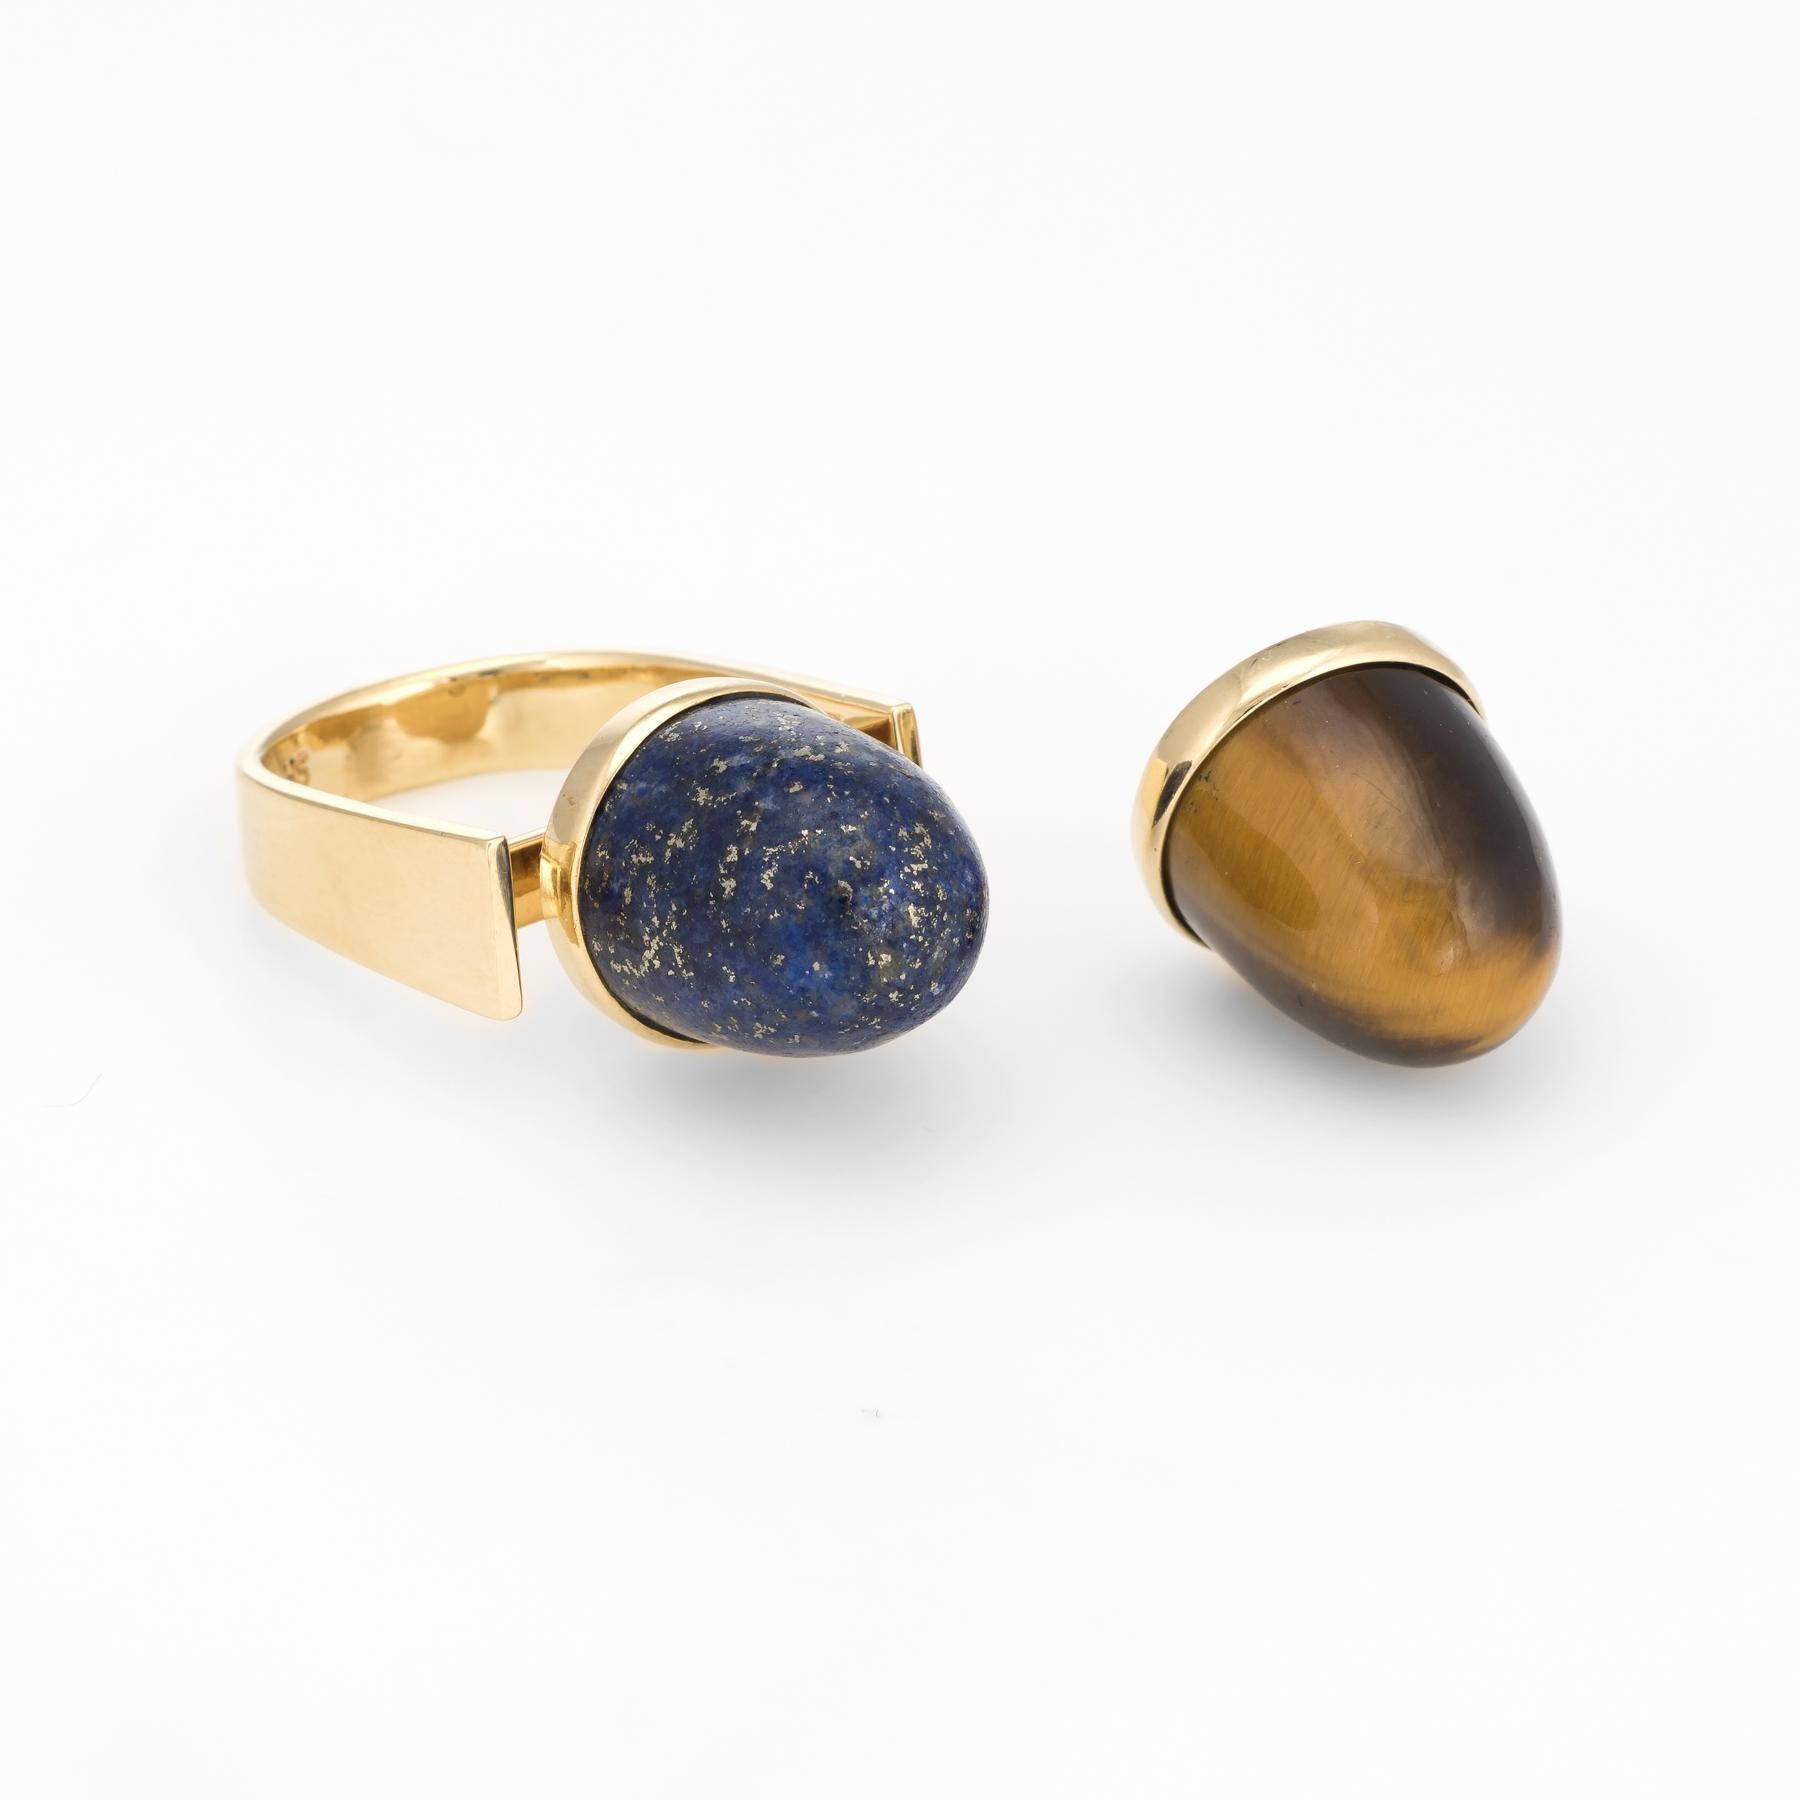 Circa 1970s, a statement cocktail ring with interchangeable components, crafted in 14 karat yellow gold. 

Lapis lazili & tigers eye measures 12mm x 12mm (both in excellent condition and free of cracks or chips).  

The unique ring features an